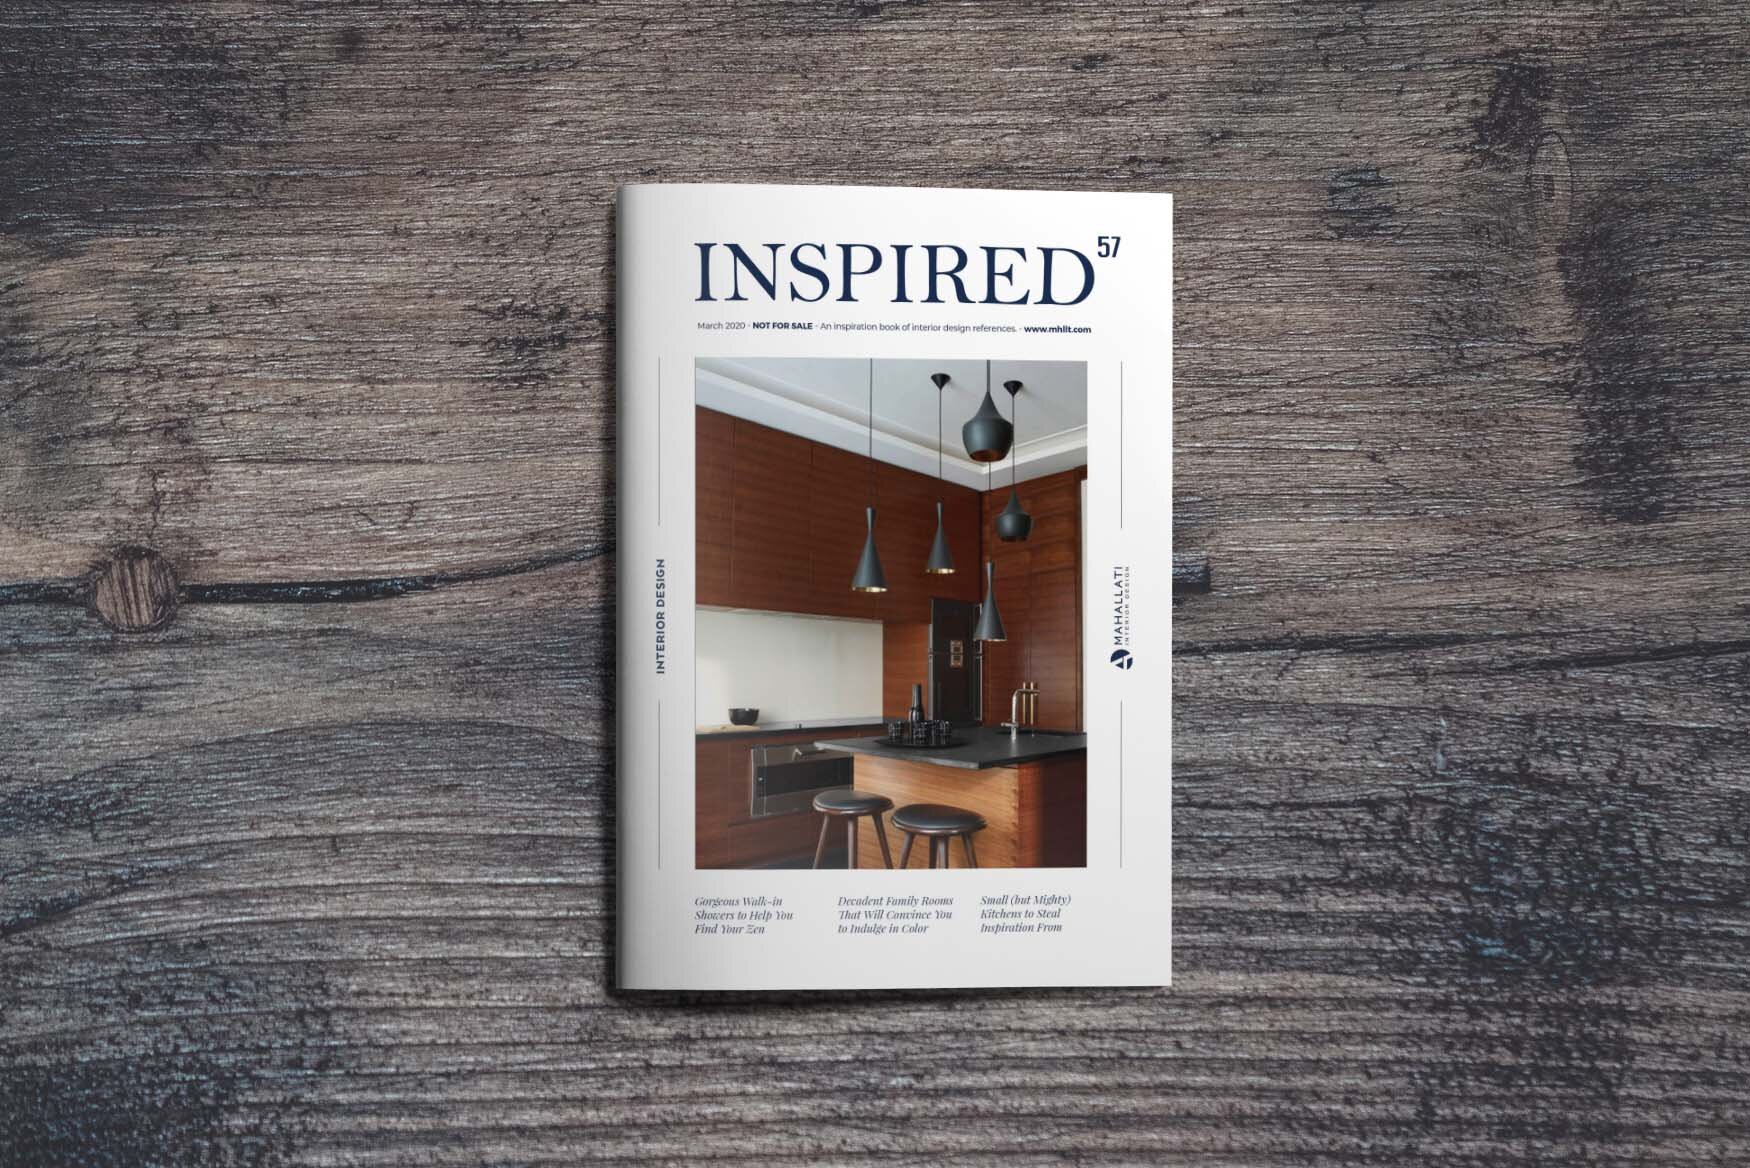 Inspired Vol 57 - March 2020